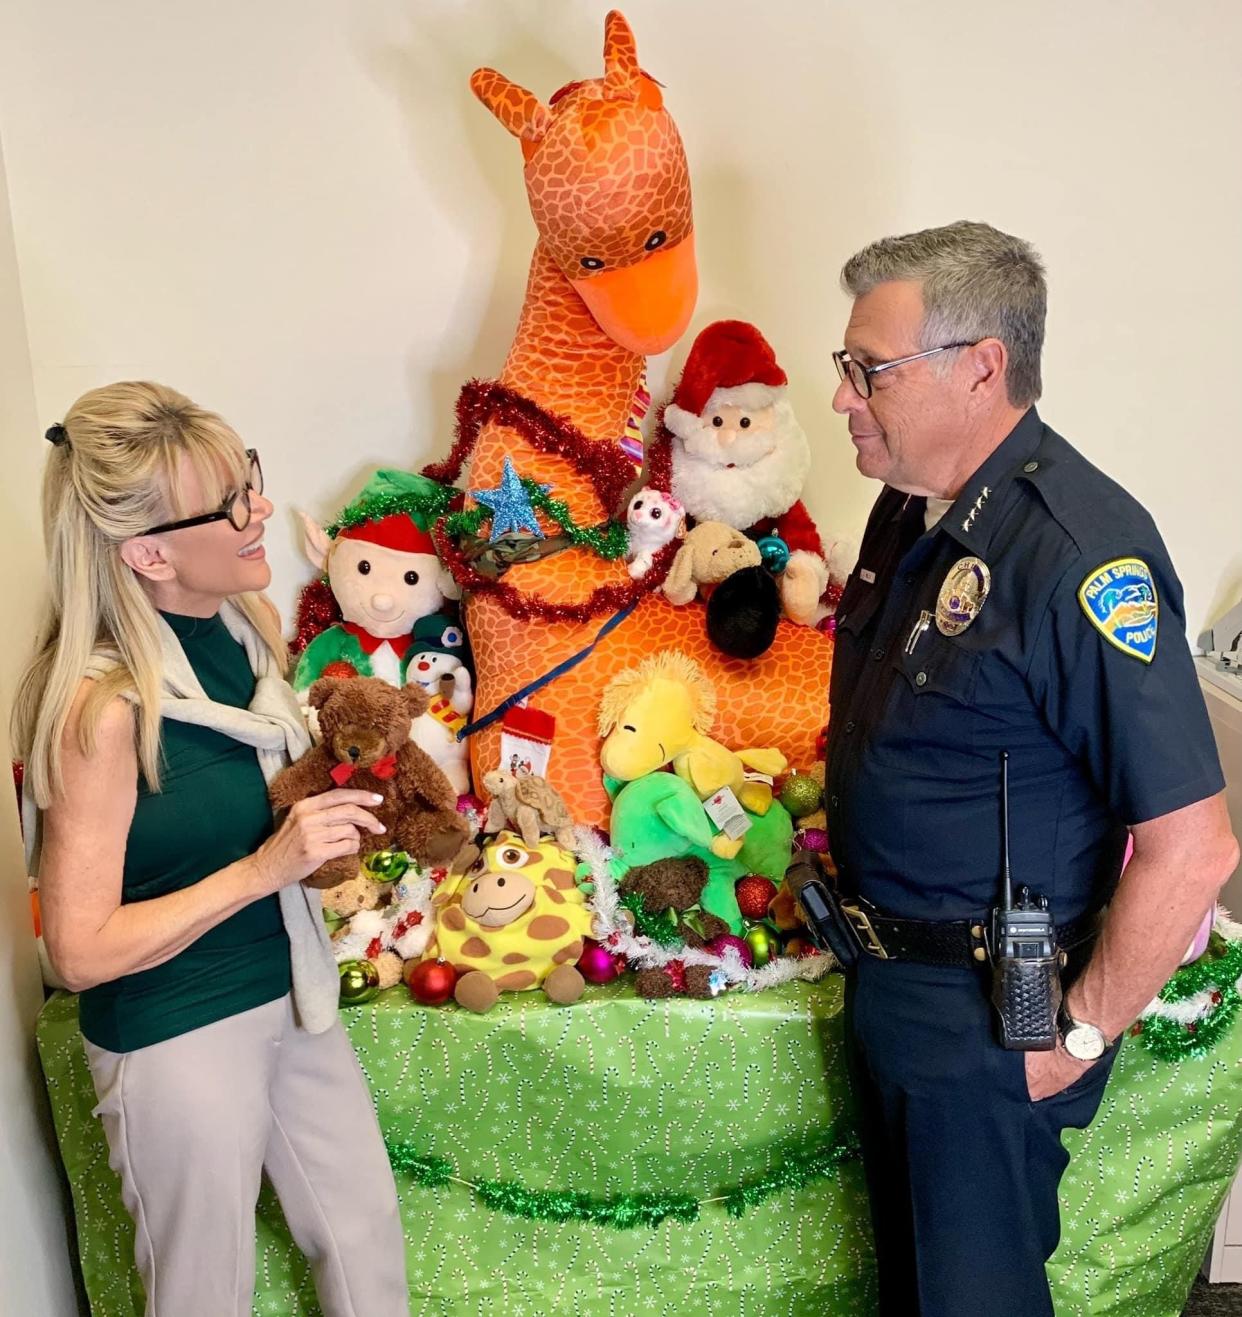 Sandie and Chief Andy Mills at the Palm Springs Police Department's  "Shop With a Cop" stuffed animal and toy display.